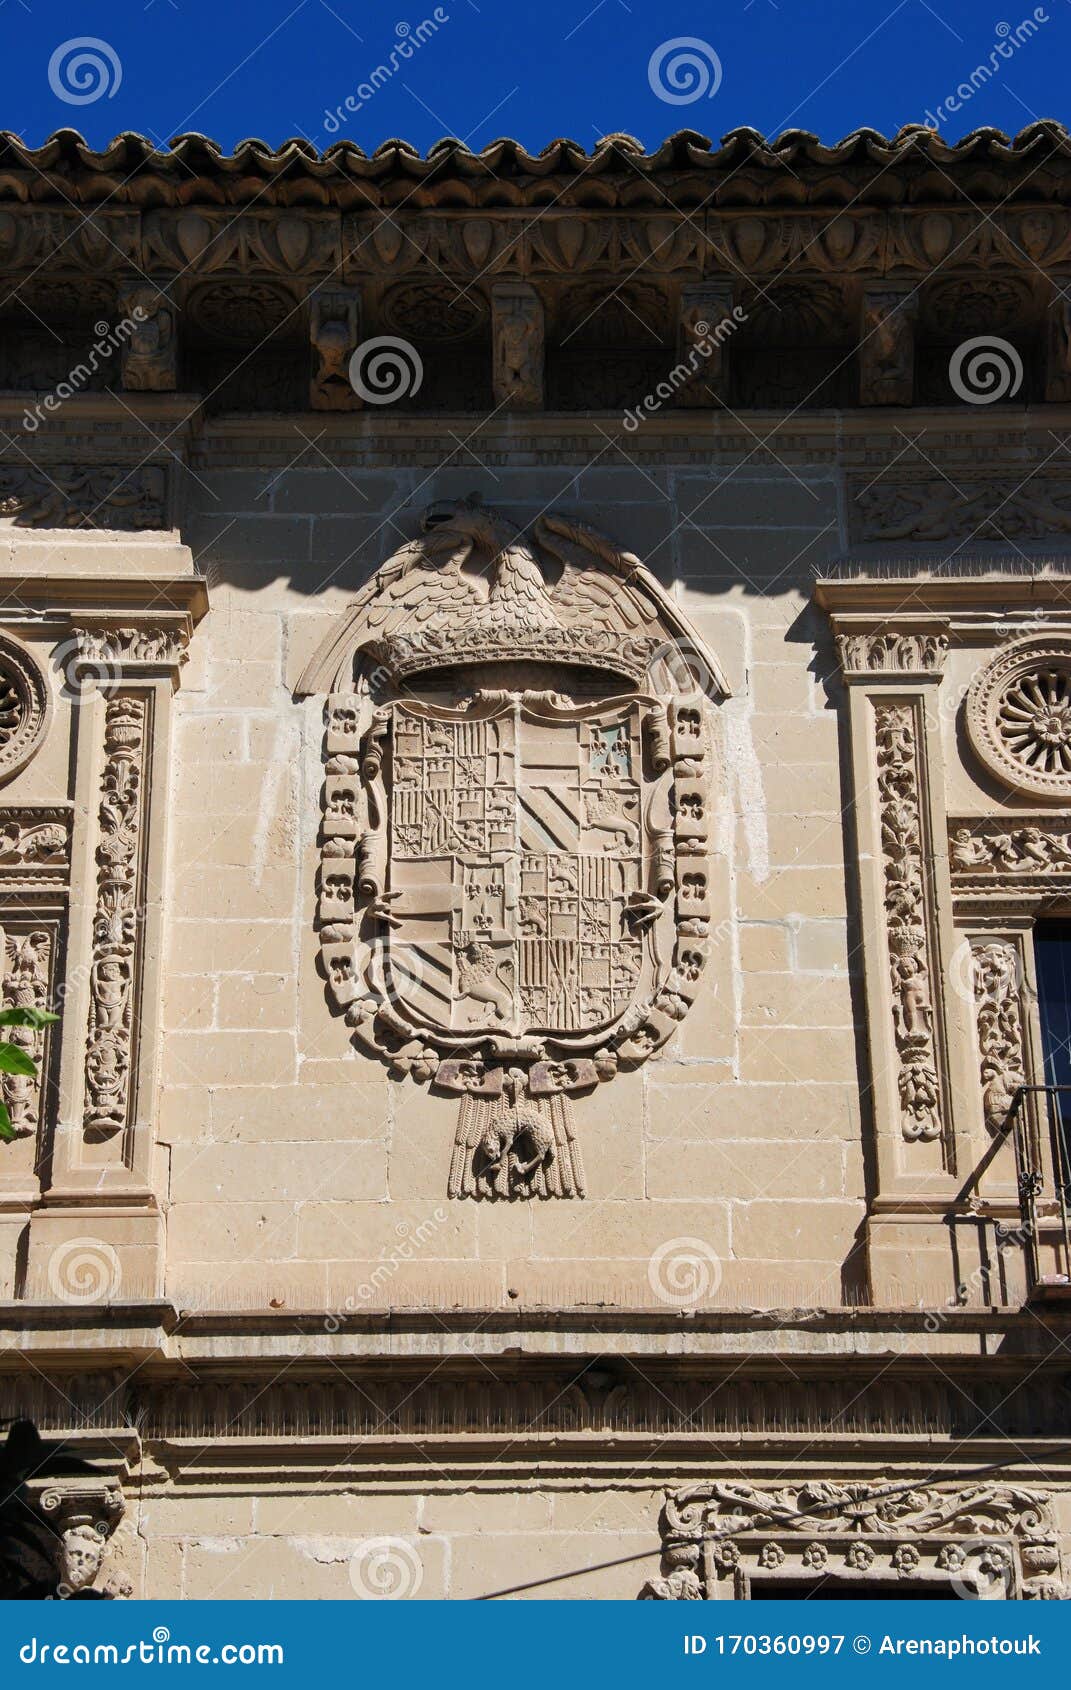 coat of arms on the front town hall along the cardenal benavides street, baeza, spain.